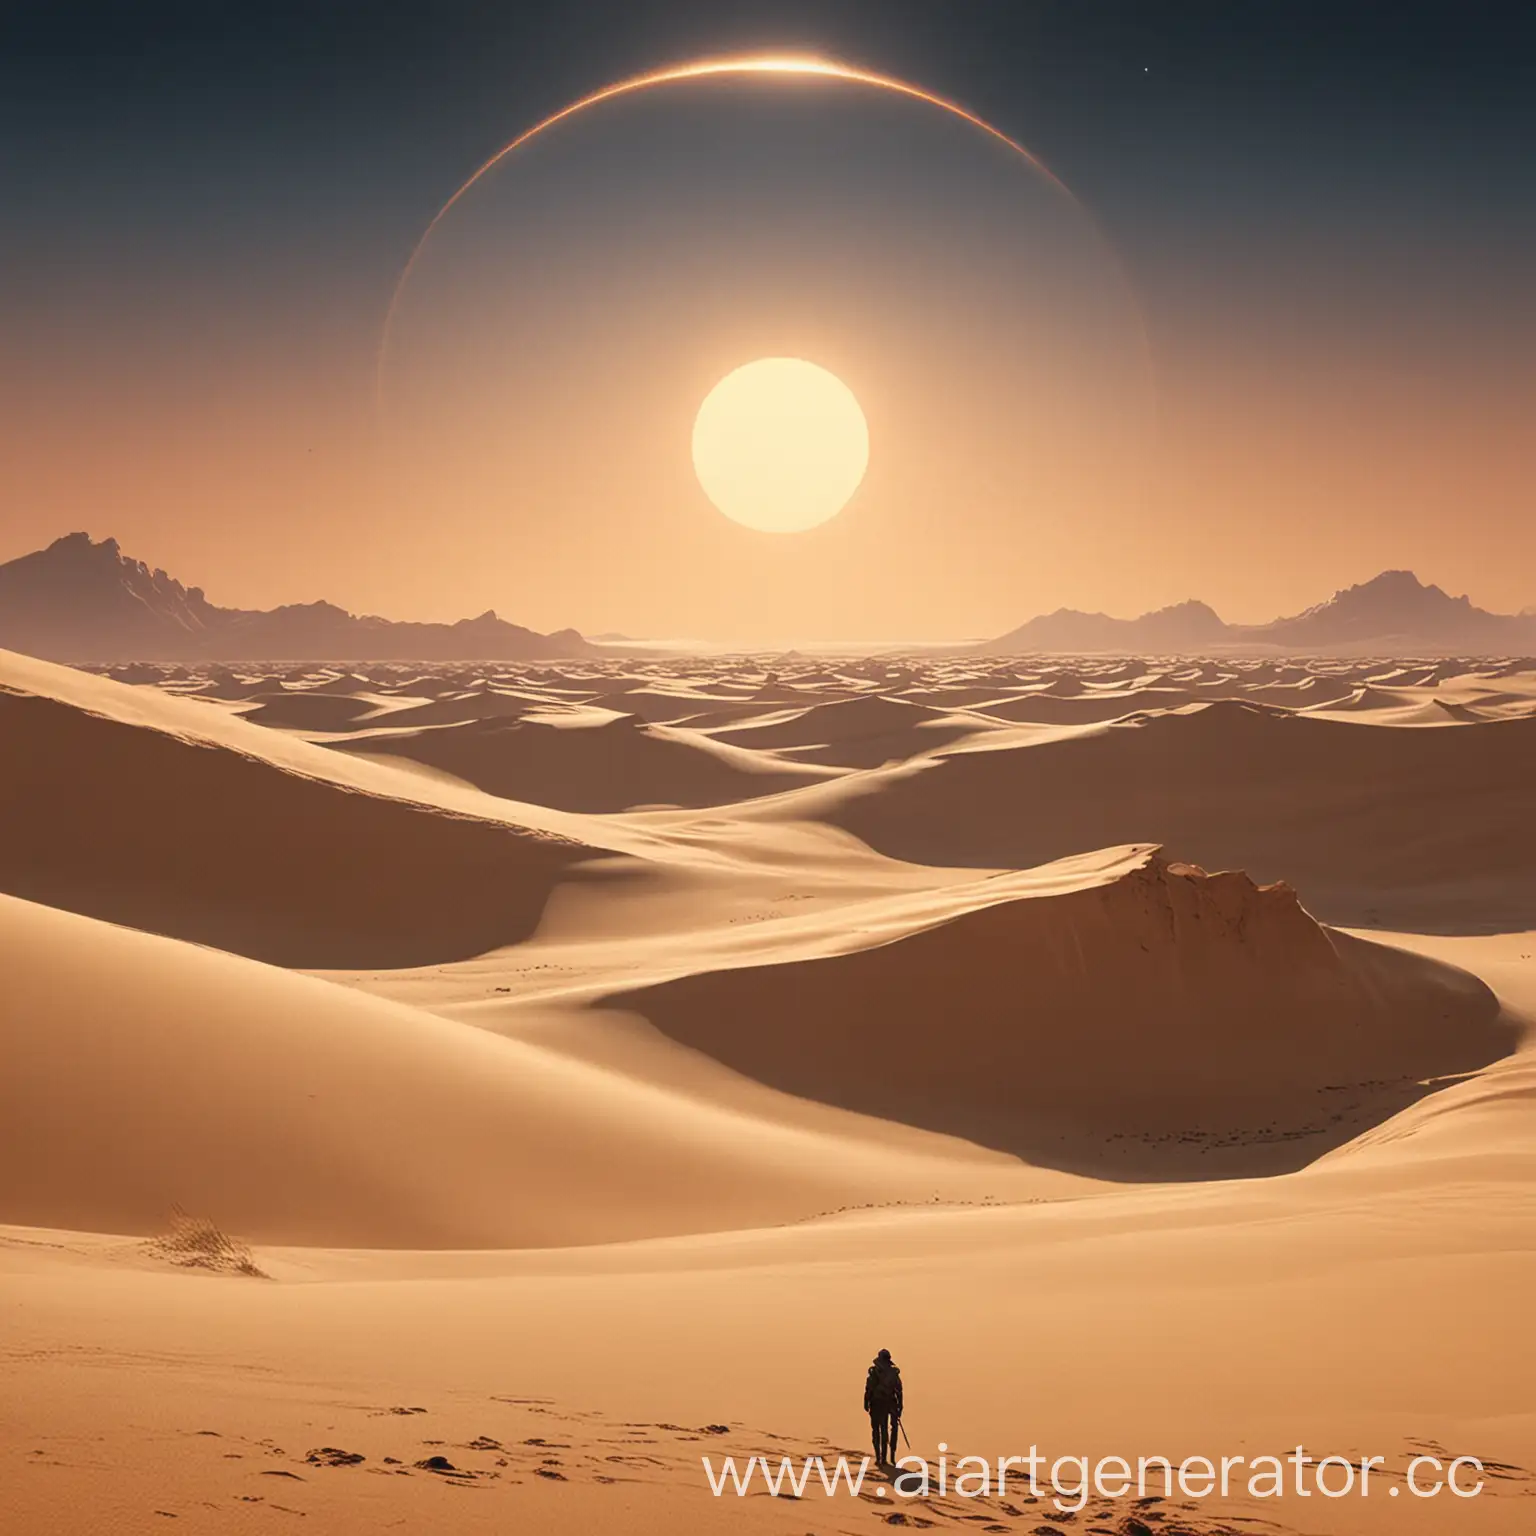 The background for a movie-style poster is a dune

